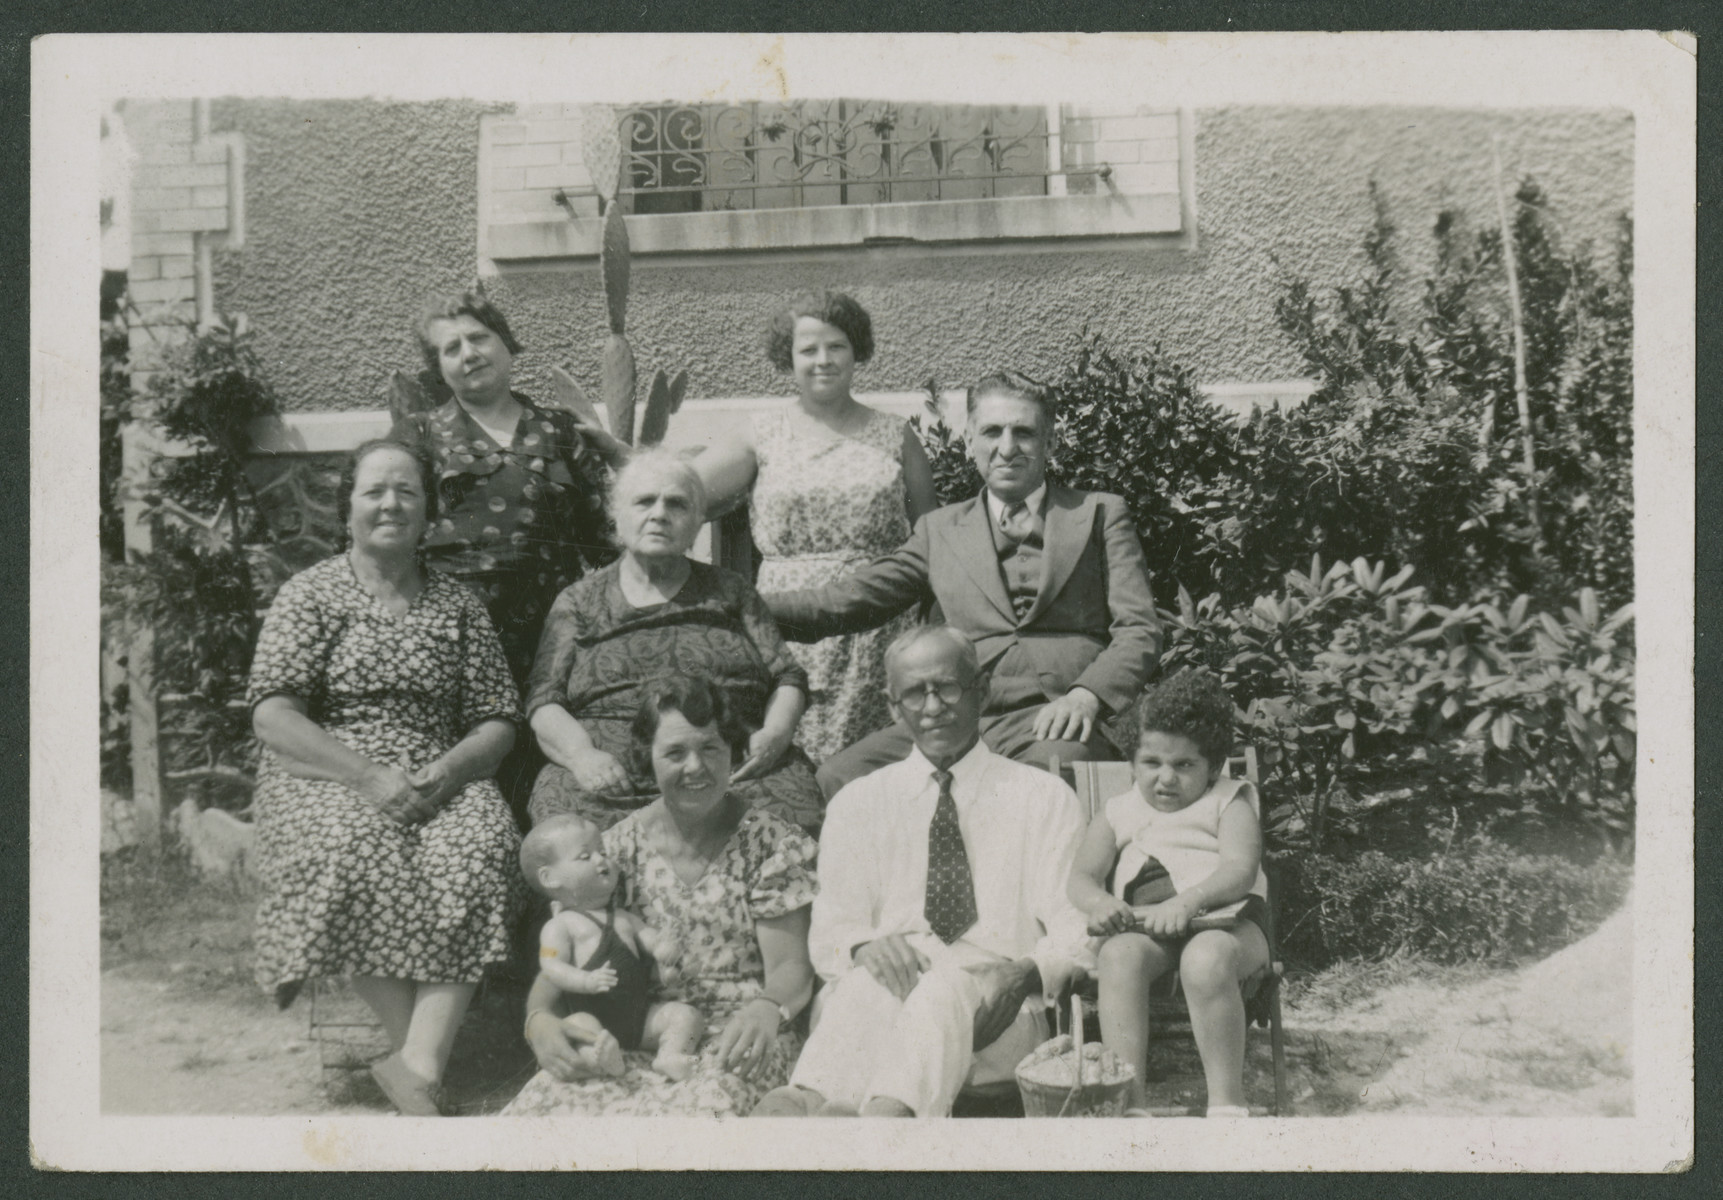 The Arditti family sits outside their home.

Jacques Arditti's grandmother (maden name Jaffe) is seated in the center.  His mother is standing on the left and his father is seated on the right.